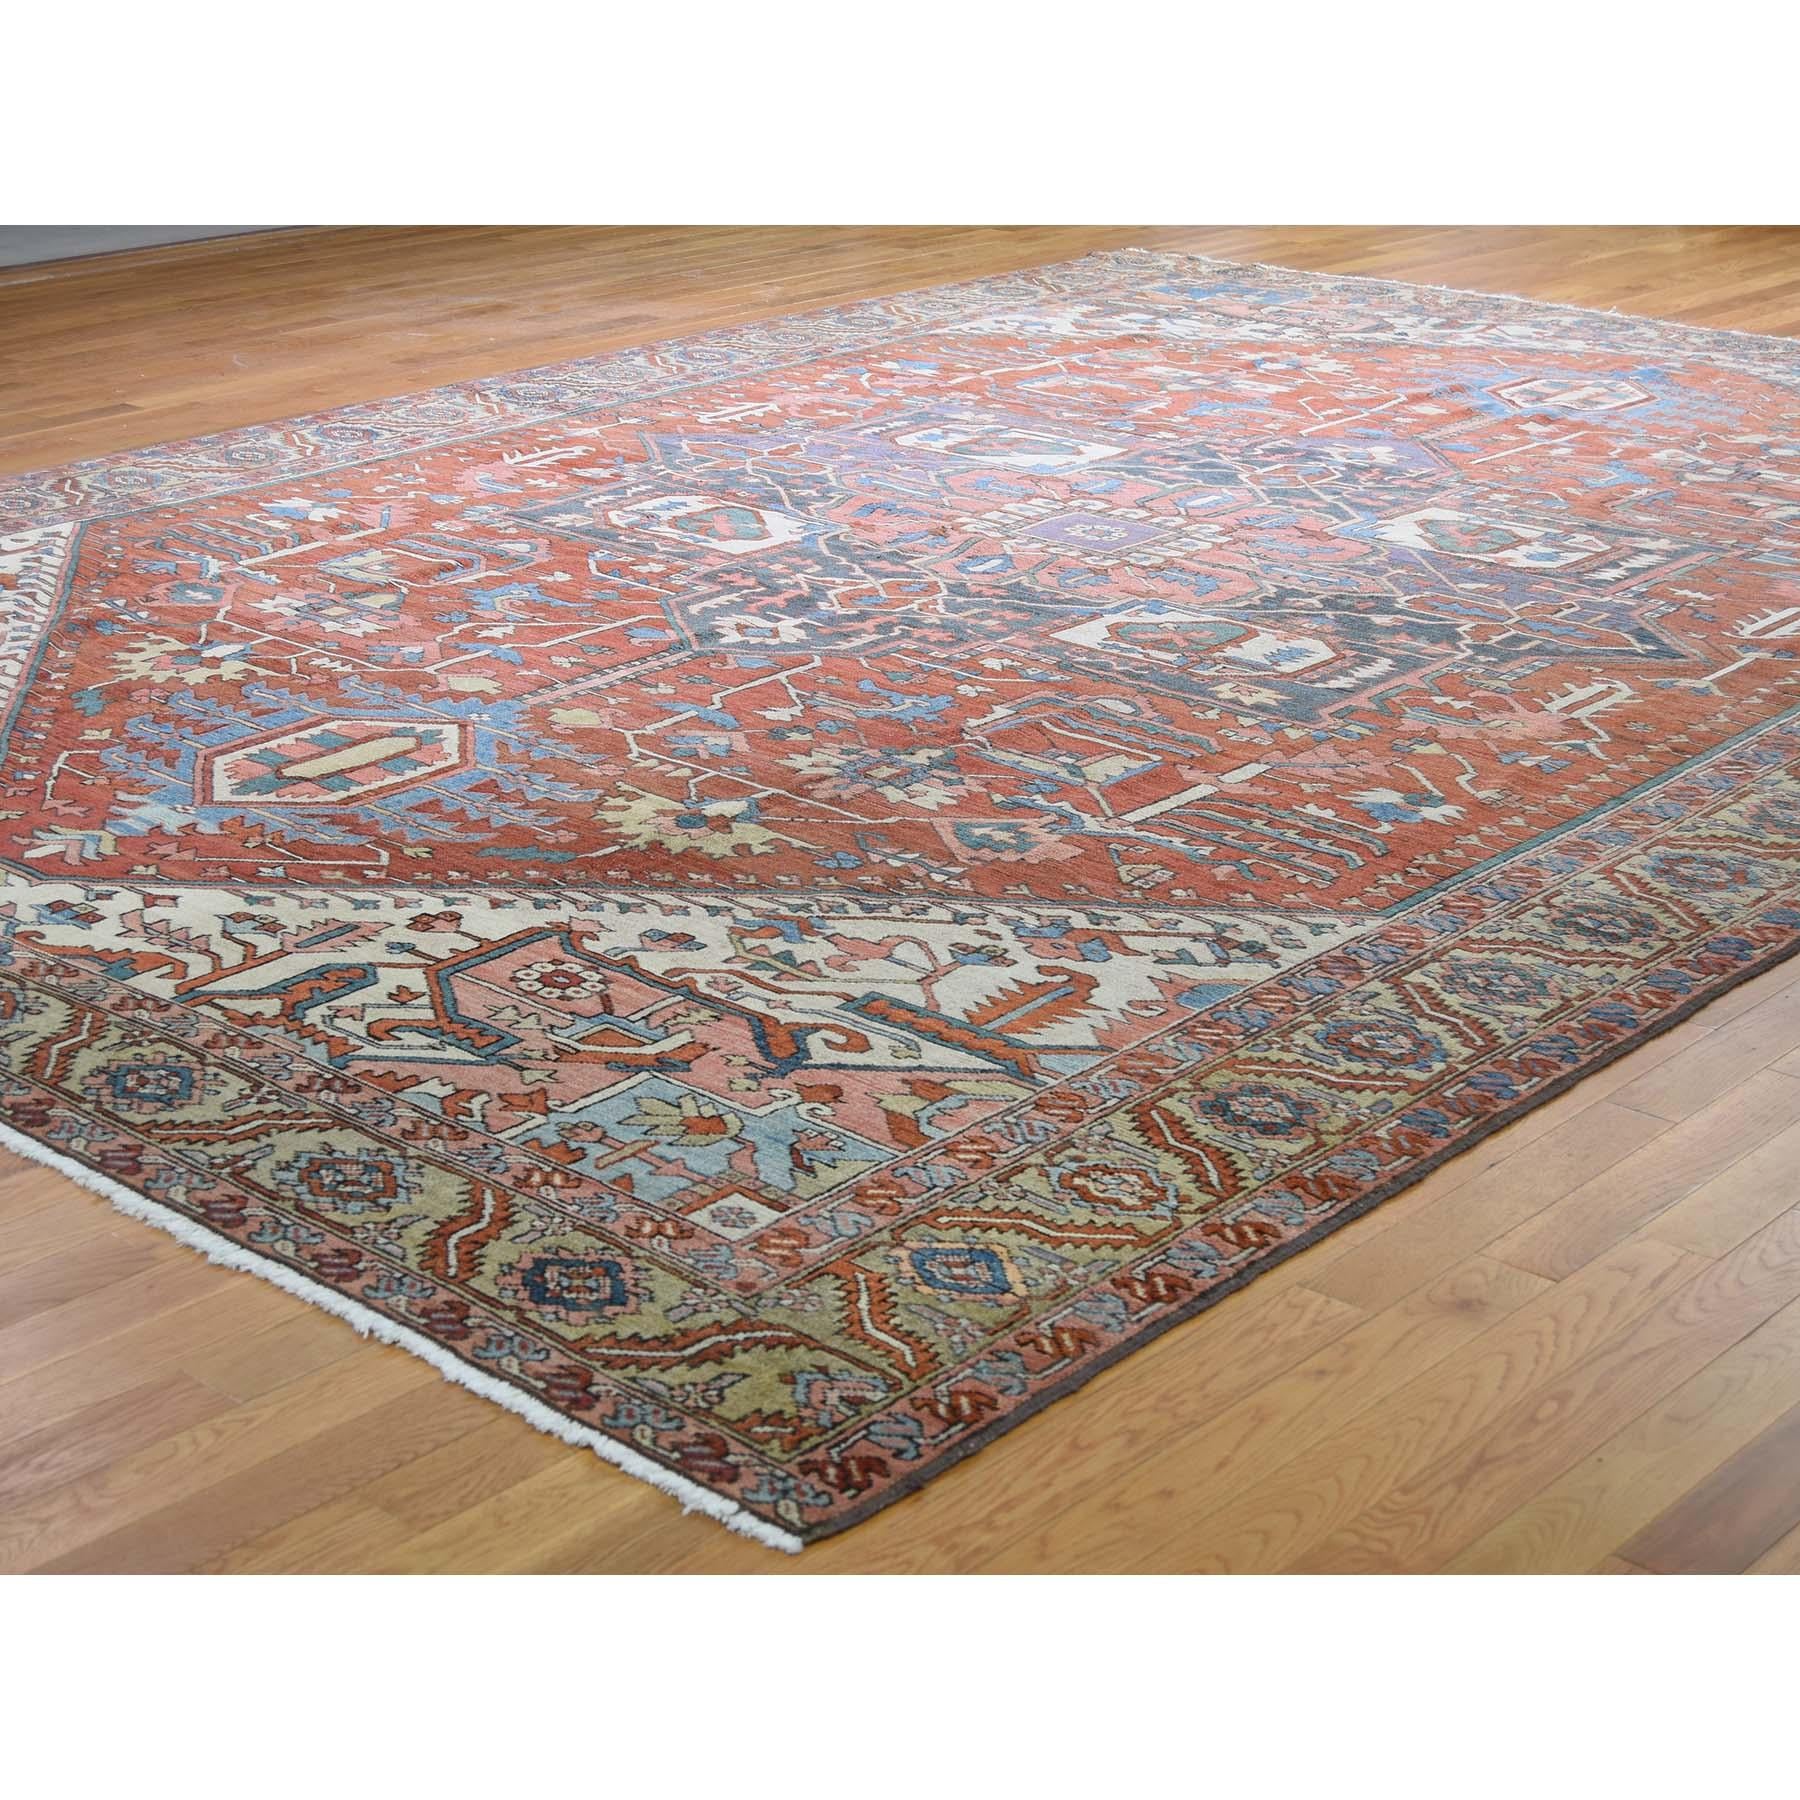 Hand-Knotted Antique Persian Serapi Heriz Good Condition Hand Knotted Oversize Oriental Rug